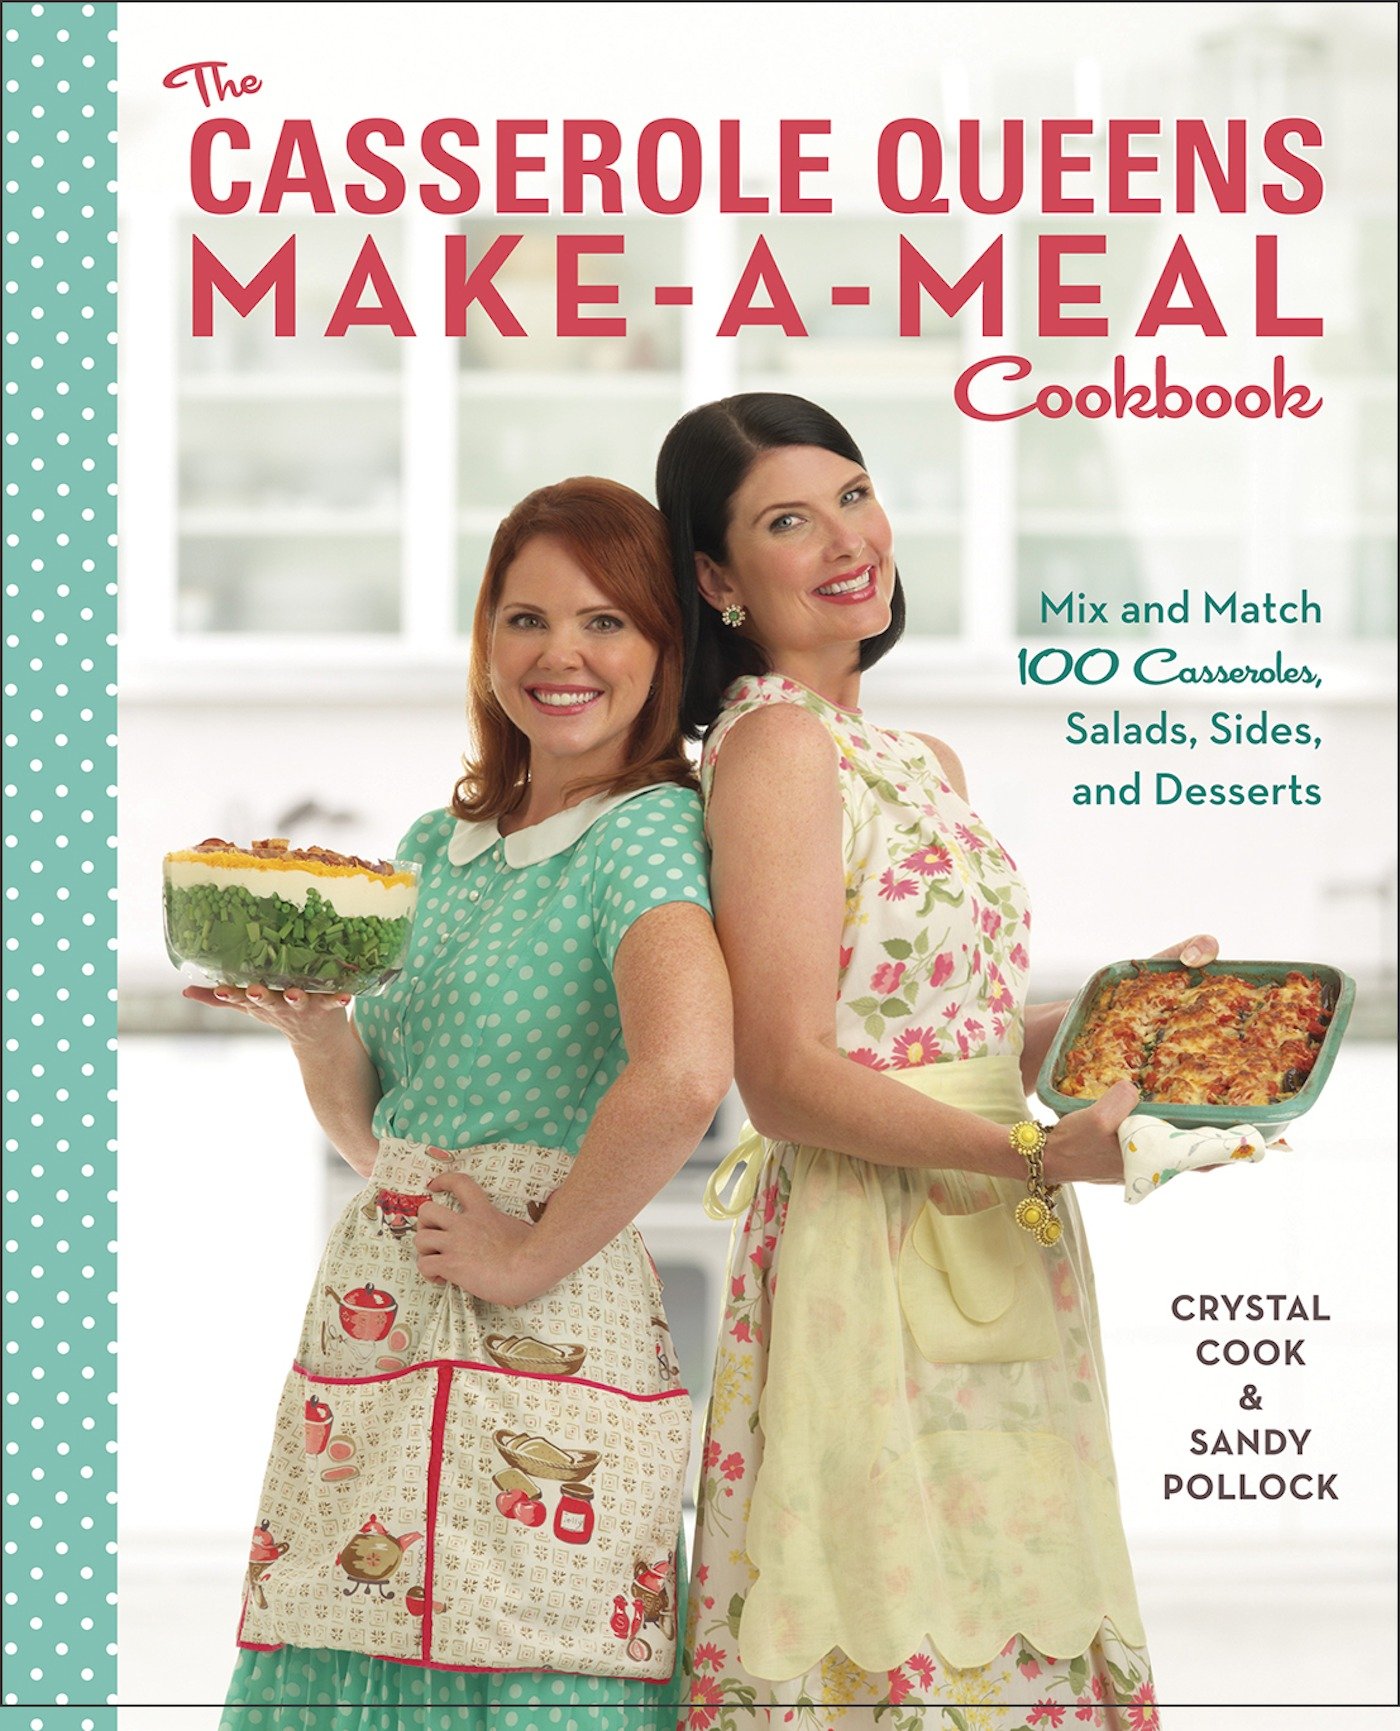 The casserole queens make-a-meal cookbook mix and match 100 casseroles, salads, sides, and desserts cover image